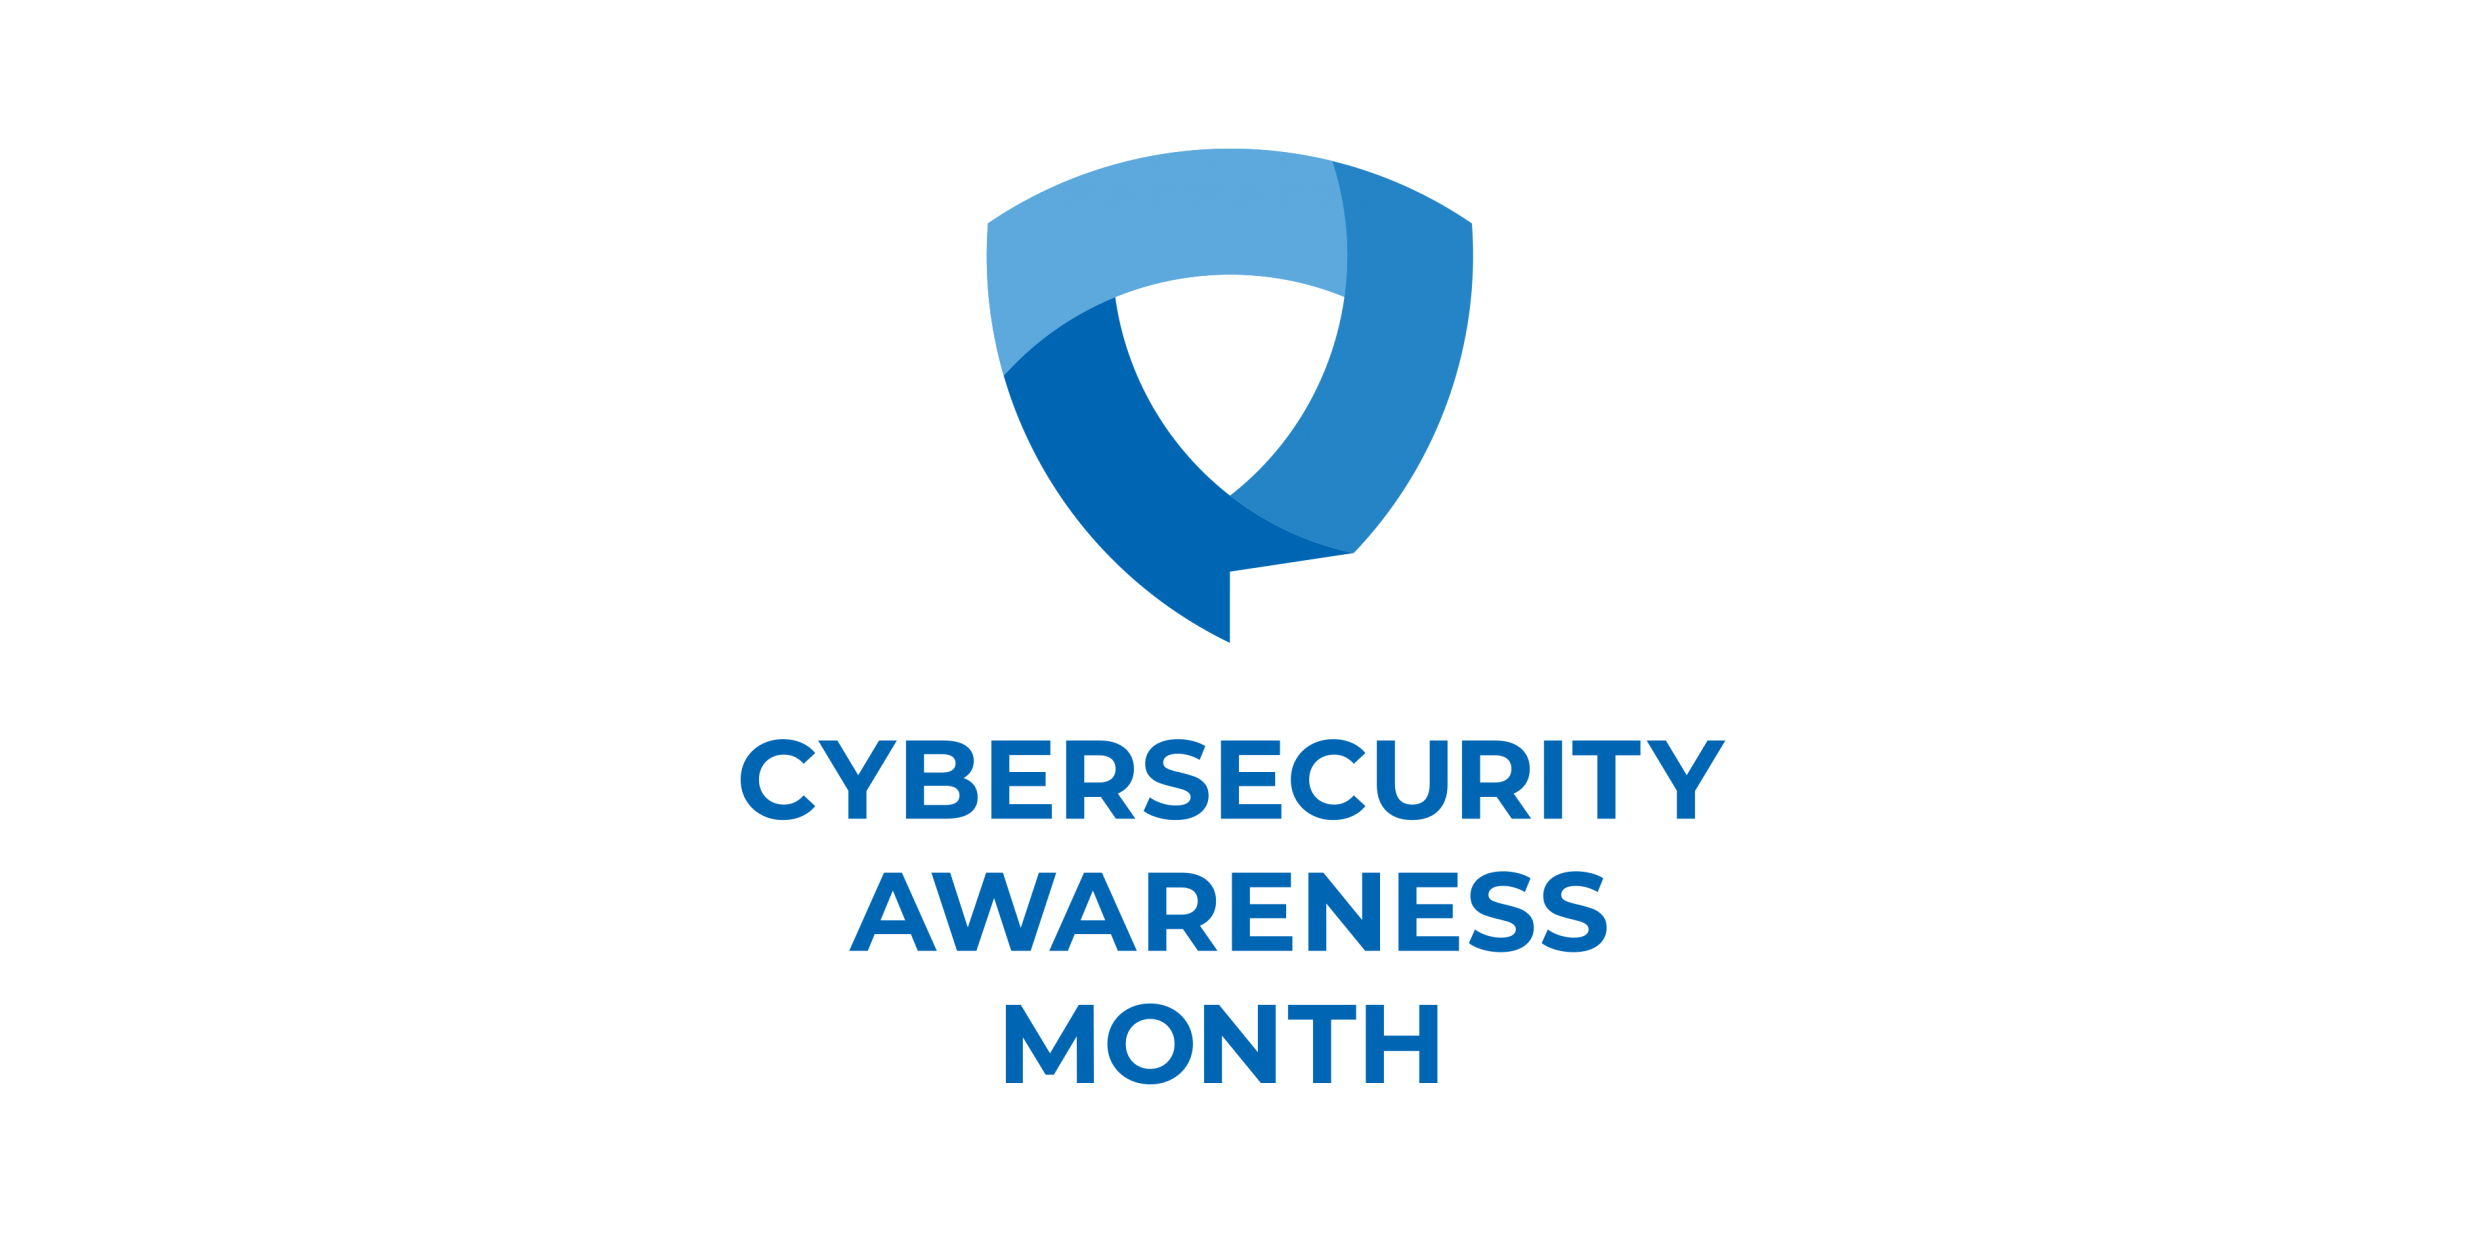 Keyavi Data Urges Businesses to Adopt Best Practices for Staying Ahead of Cyber Criminals as National Cybersecurity Awareness Month Begins